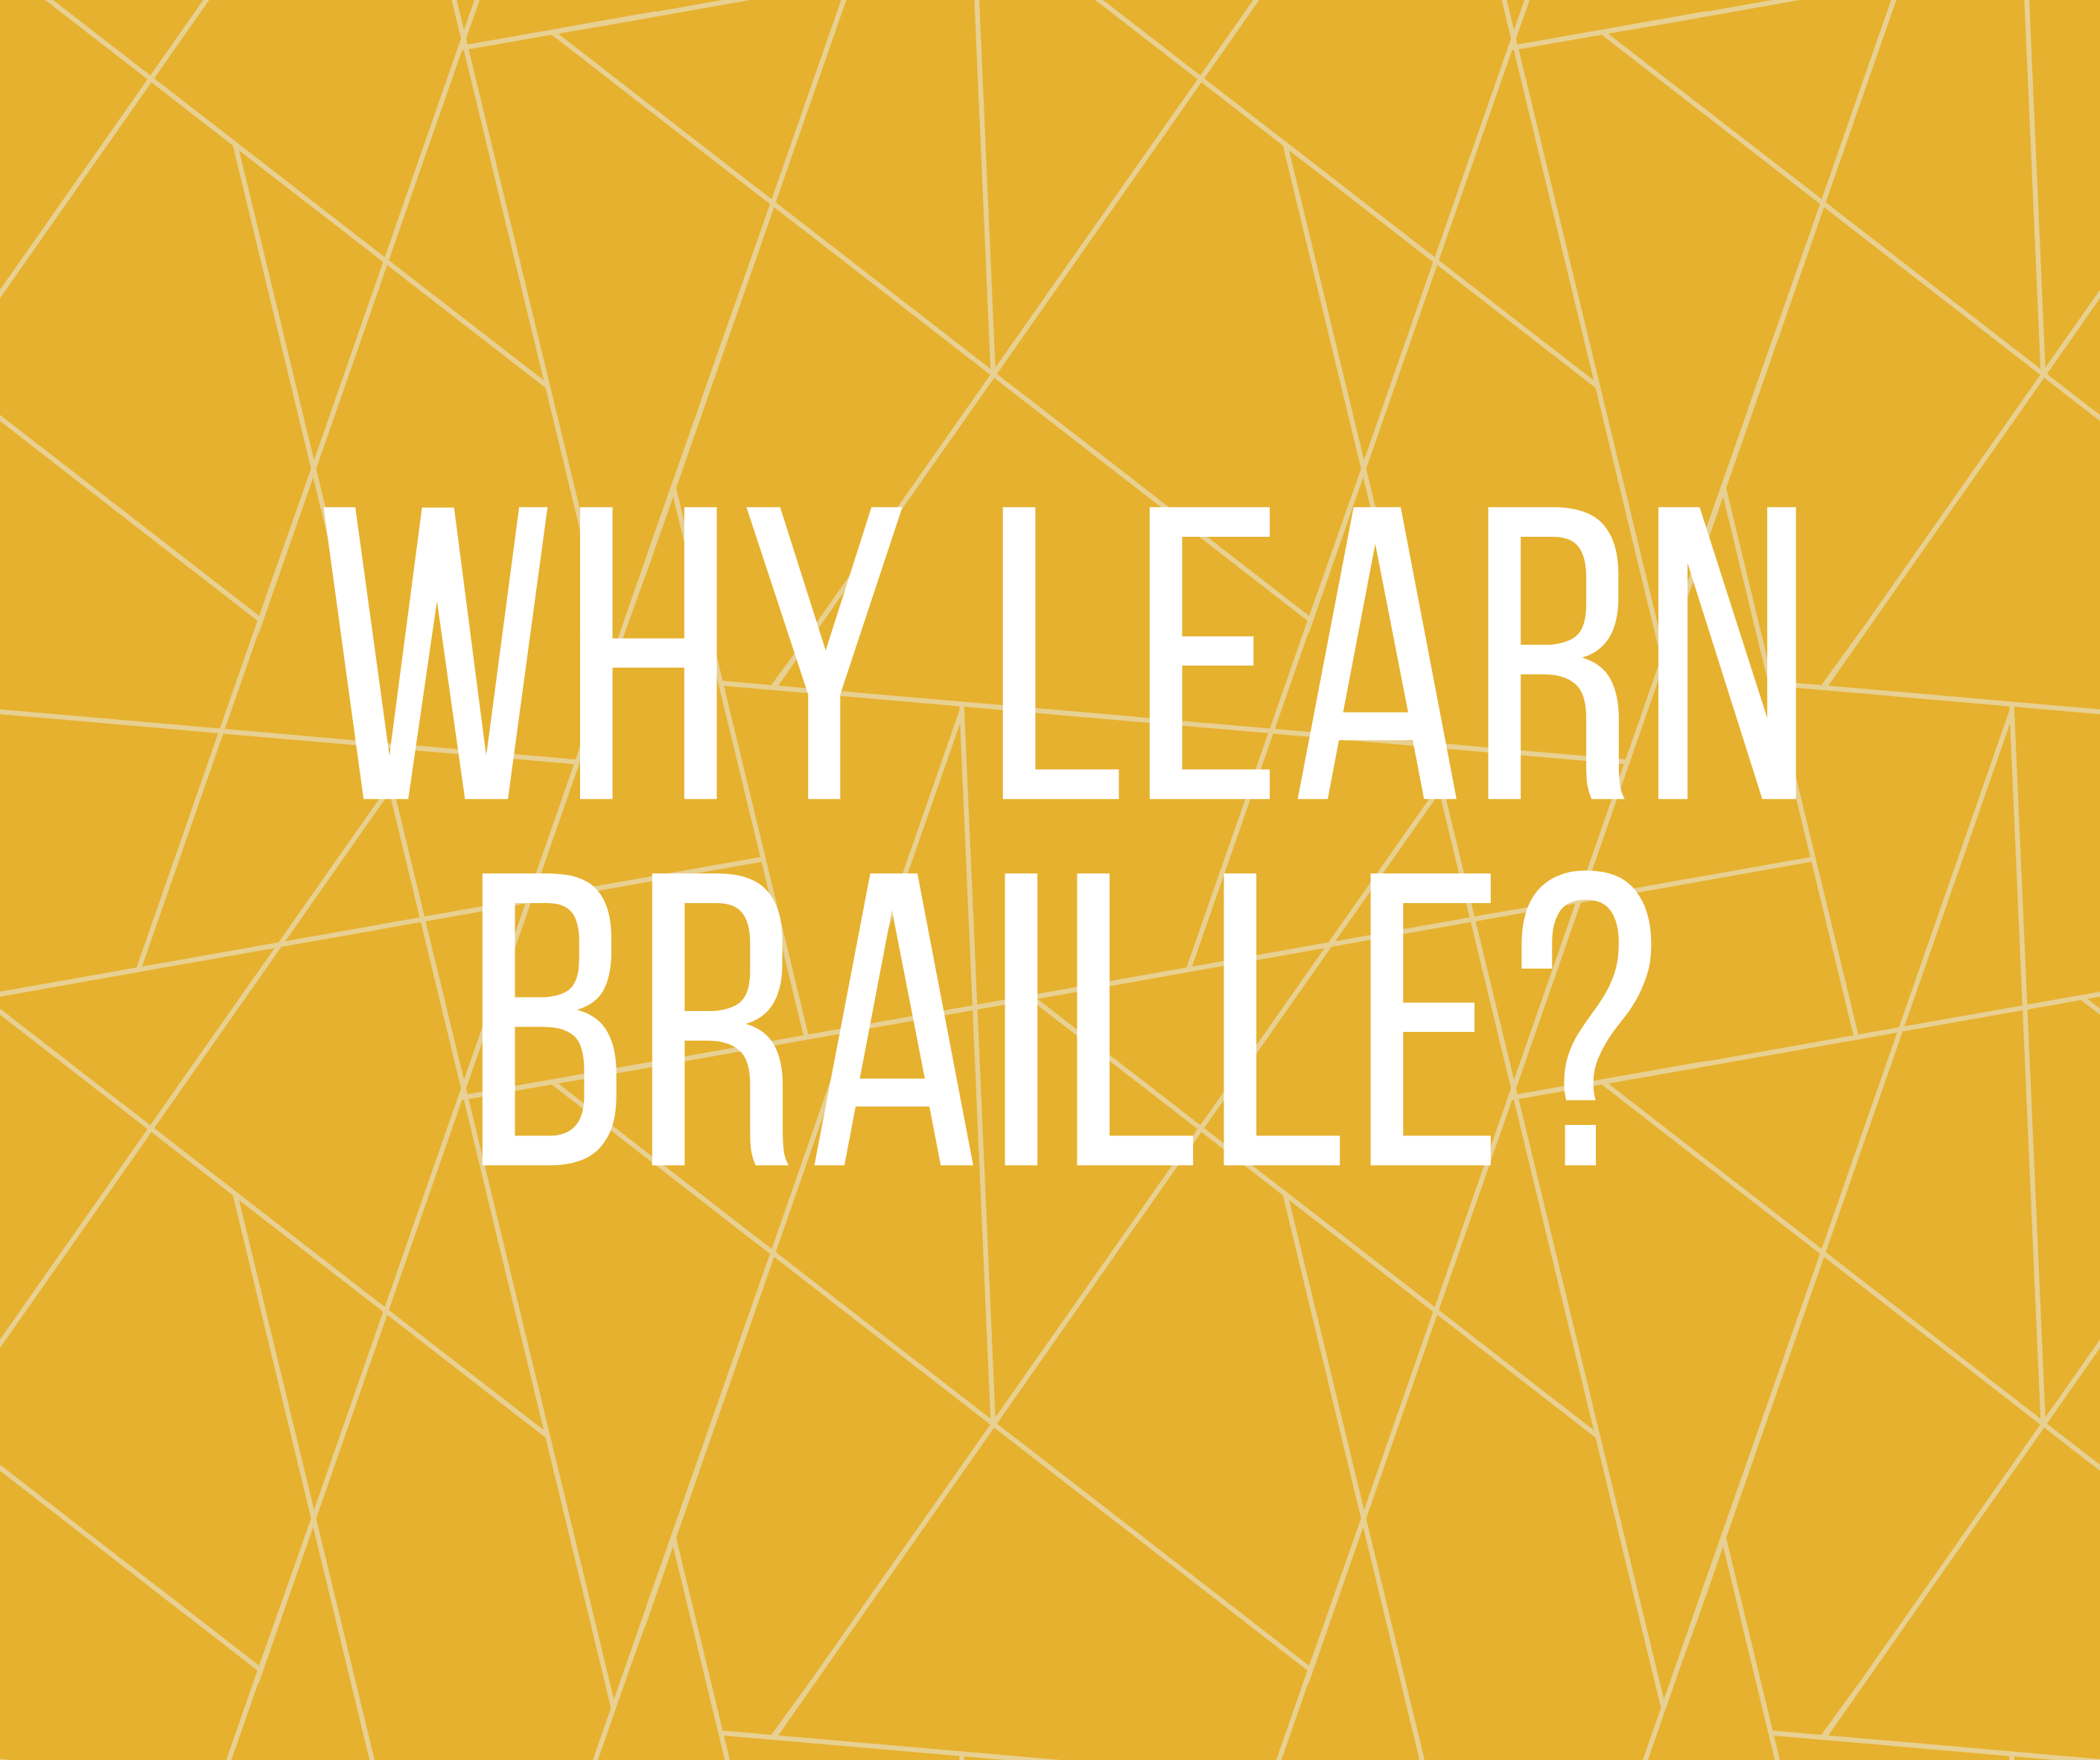 Who Should Learn Braille? And Why?